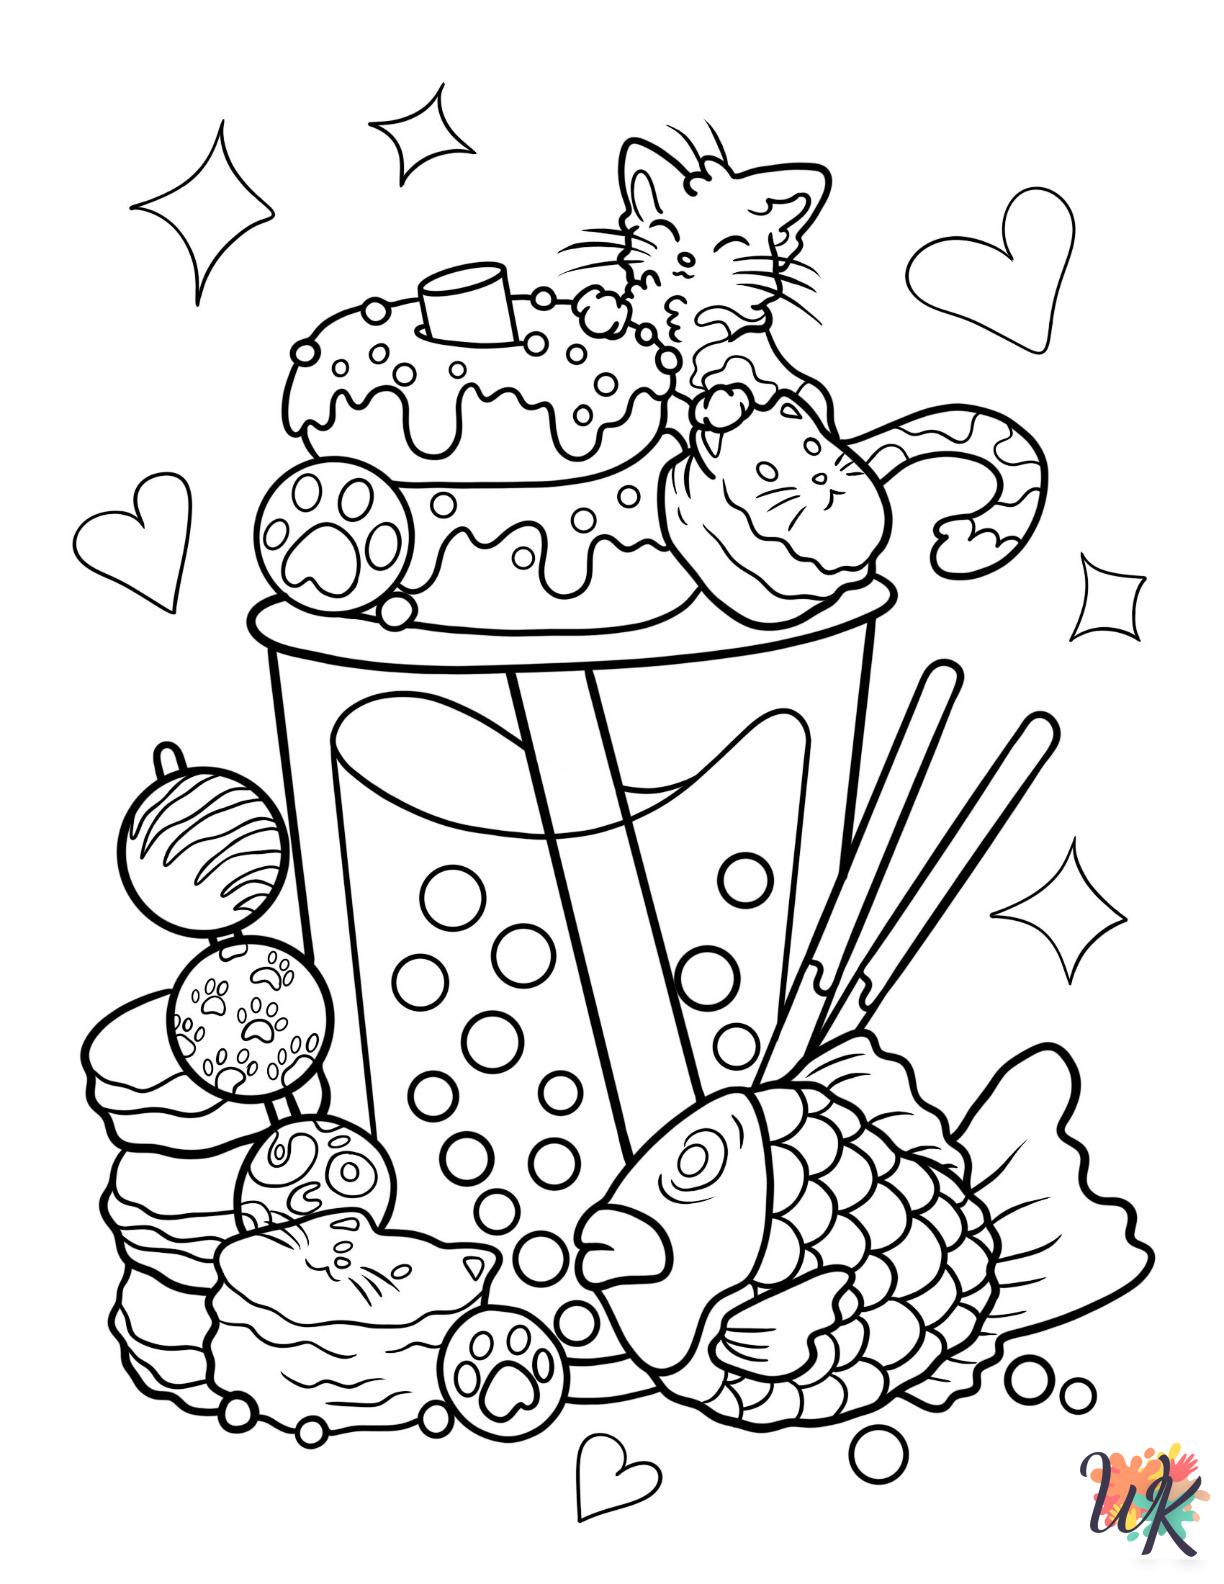 old-fashioned Boba Tea coloring pages